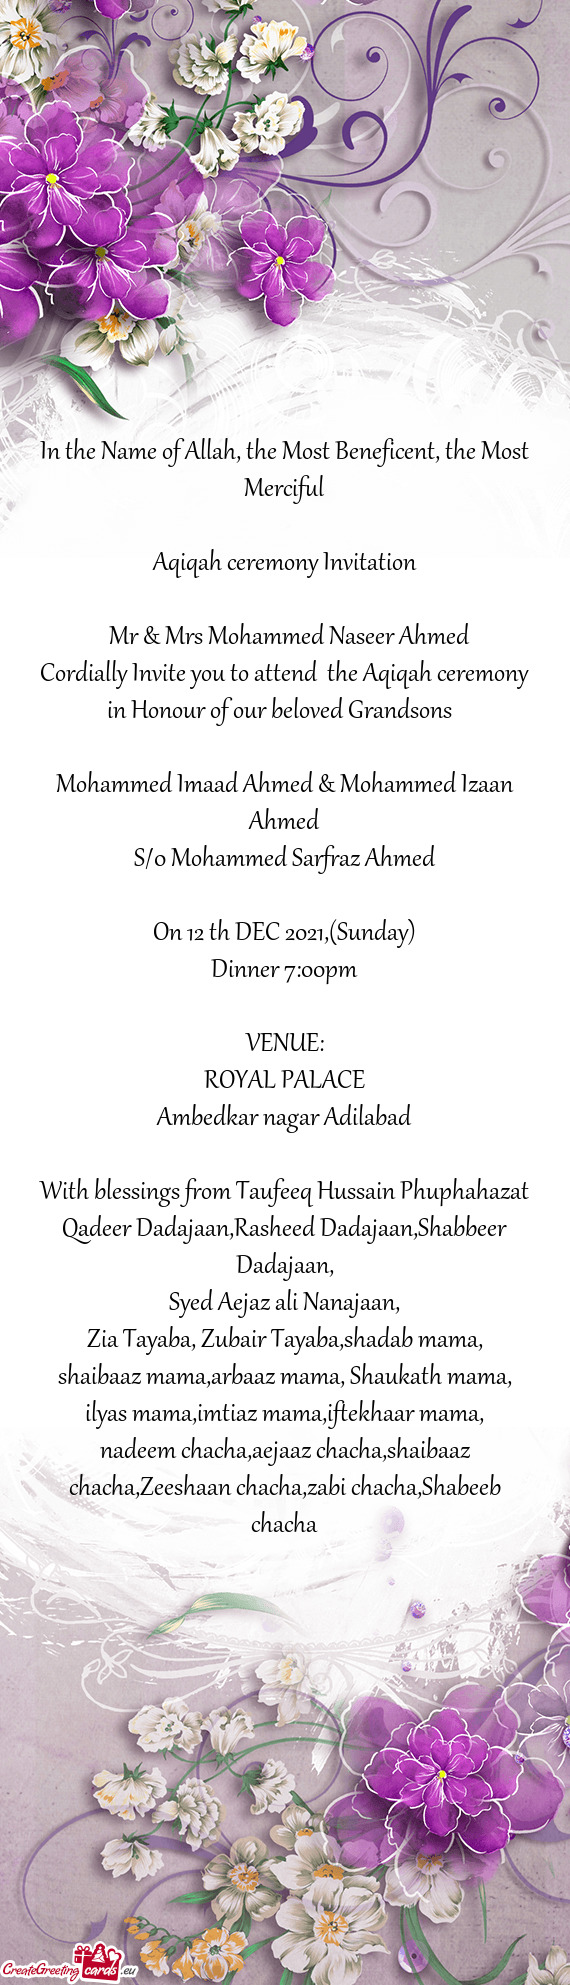 Cordially Invite you to attend the Aqiqah ceremony in Honour of our beloved Grandsons